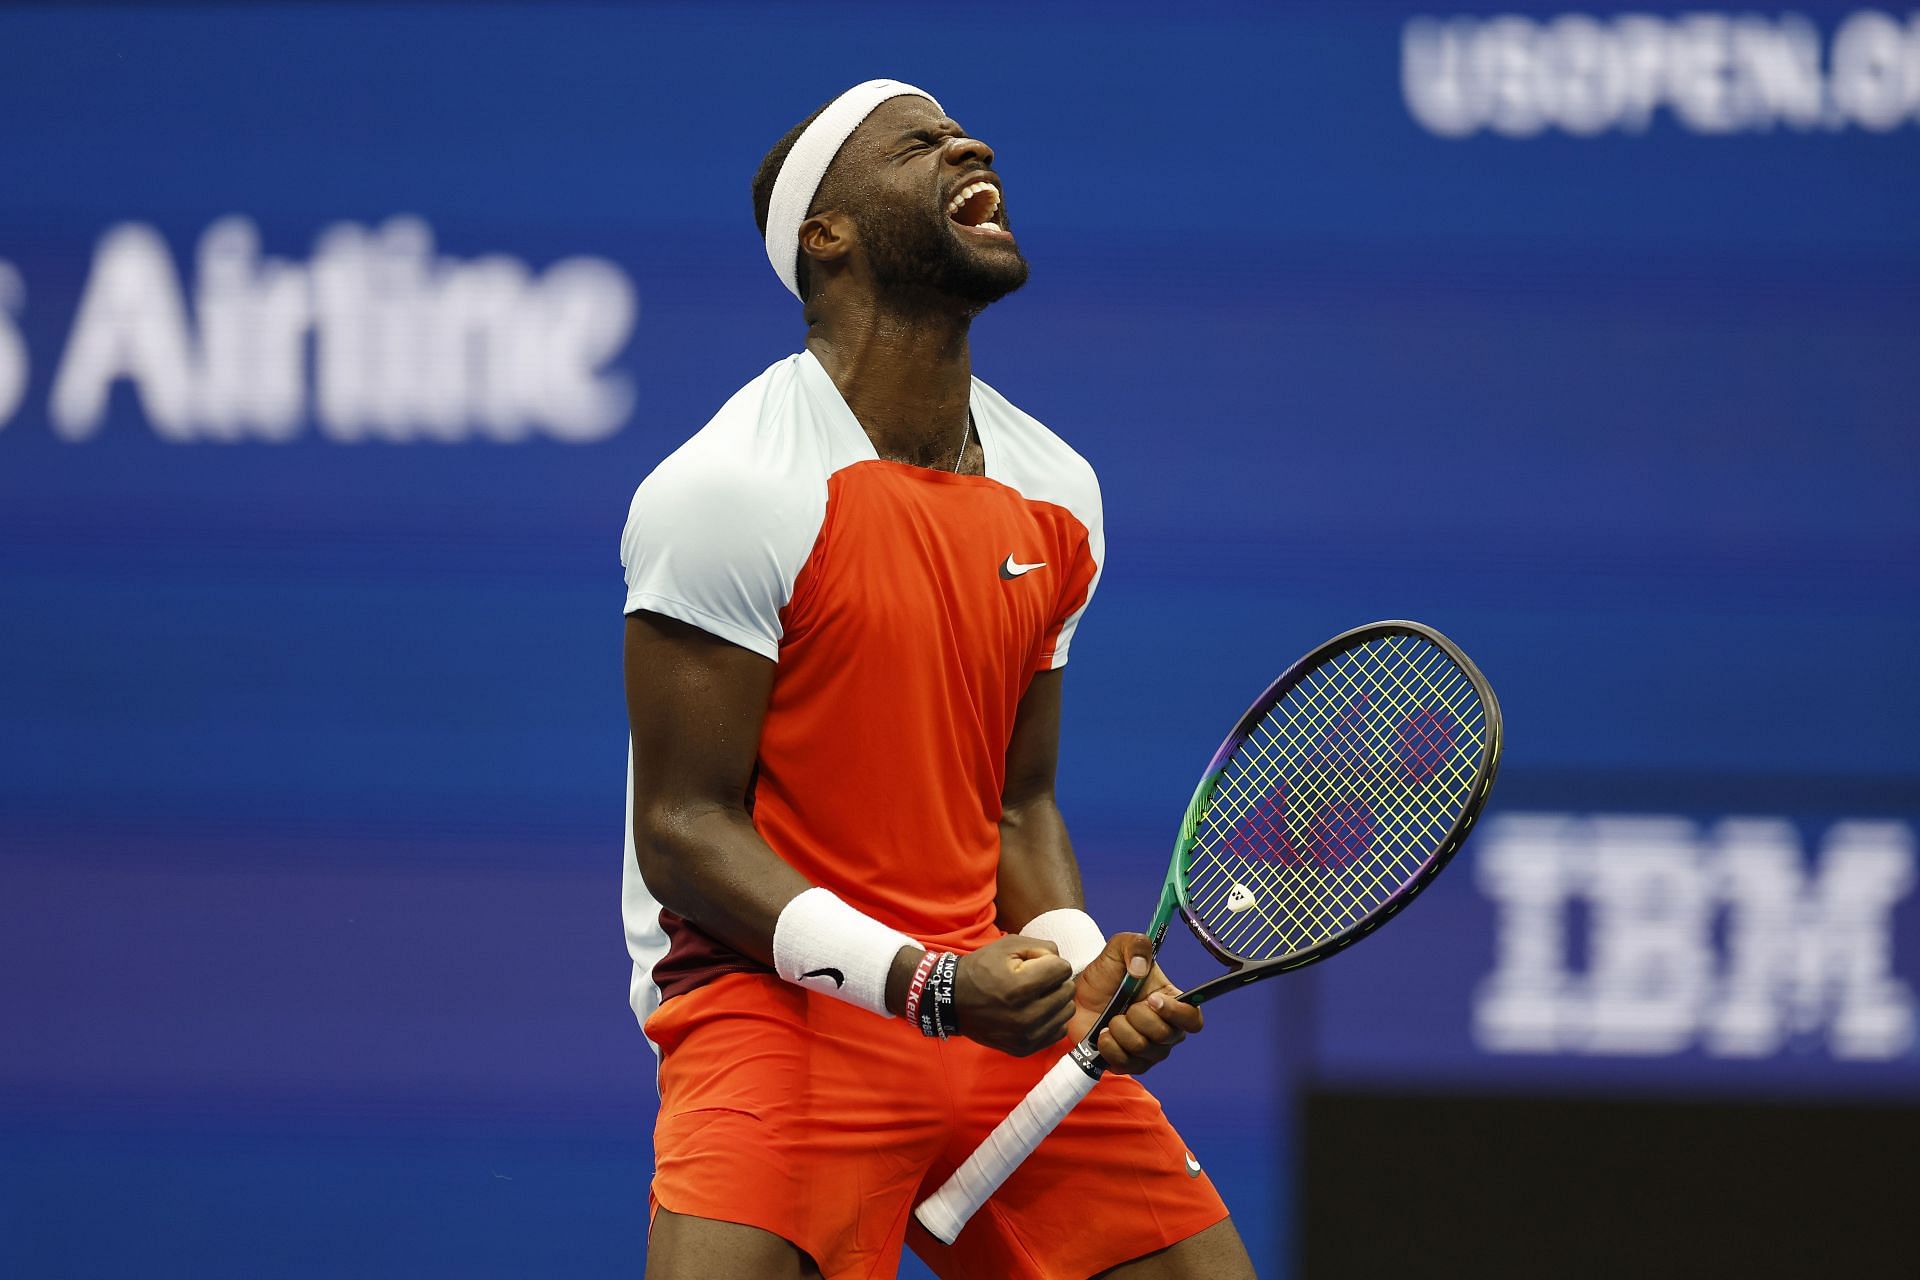 Frances Tiafoe celebrates his win against Andrey Rublev in the 2022 US Open quarterfinals.